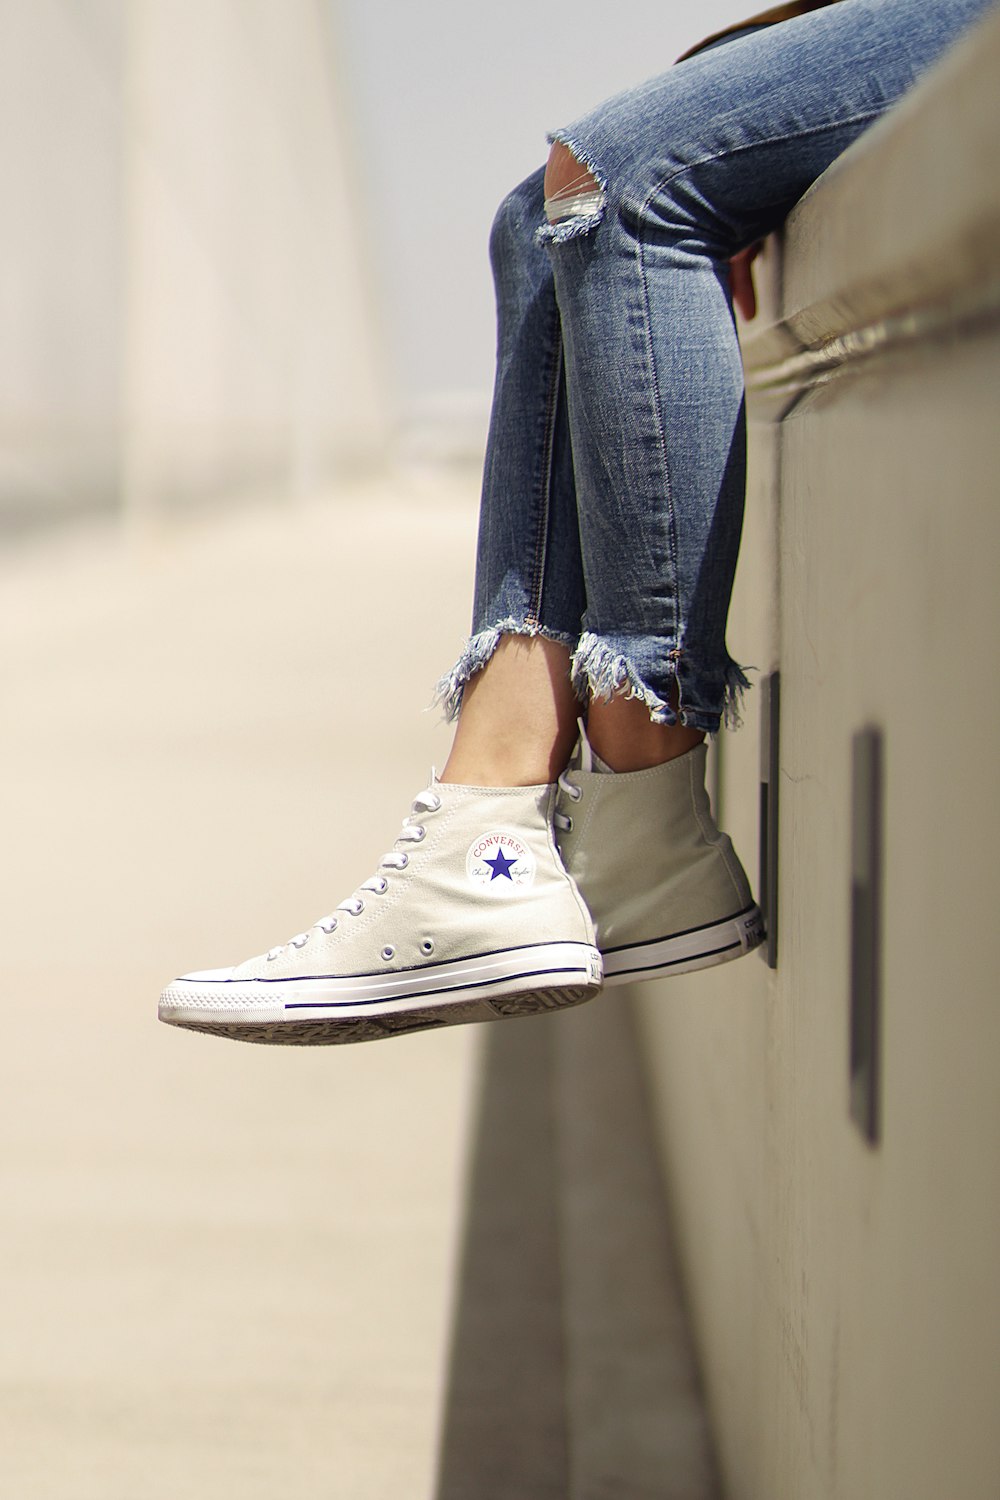 Woman wearing white low-top sneakers photo Image on Unsplash